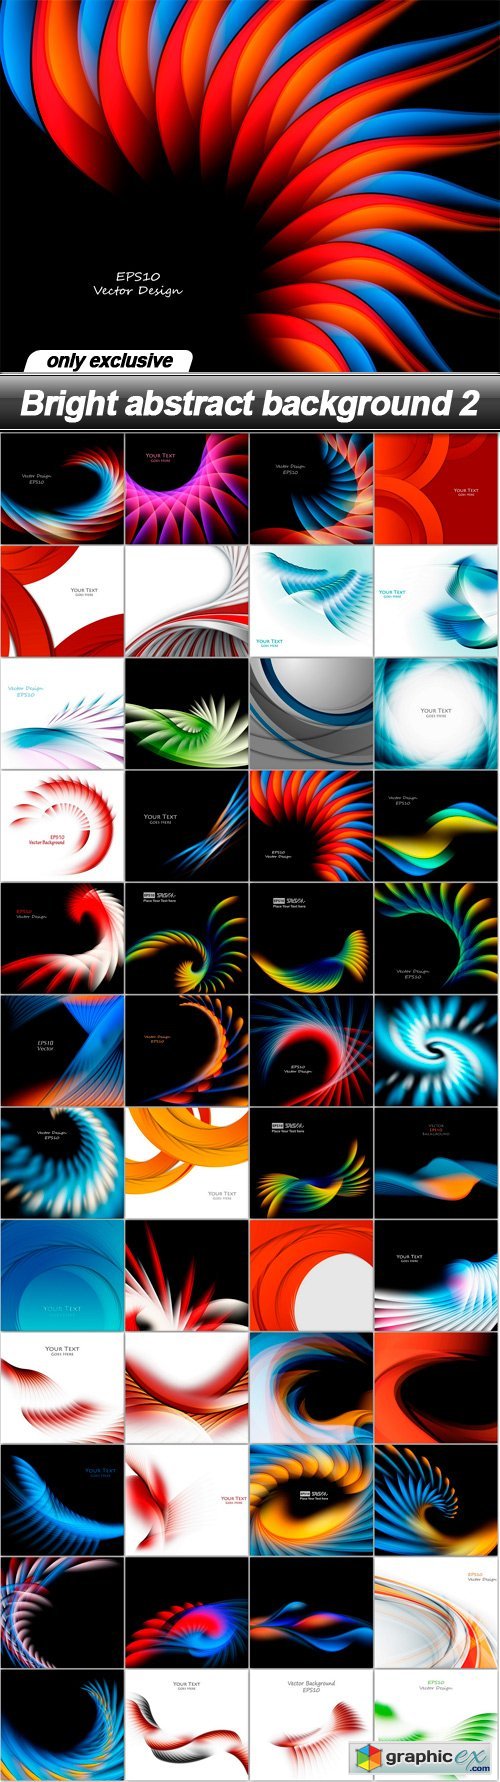 Bright abstract background 2 - 48 EPS